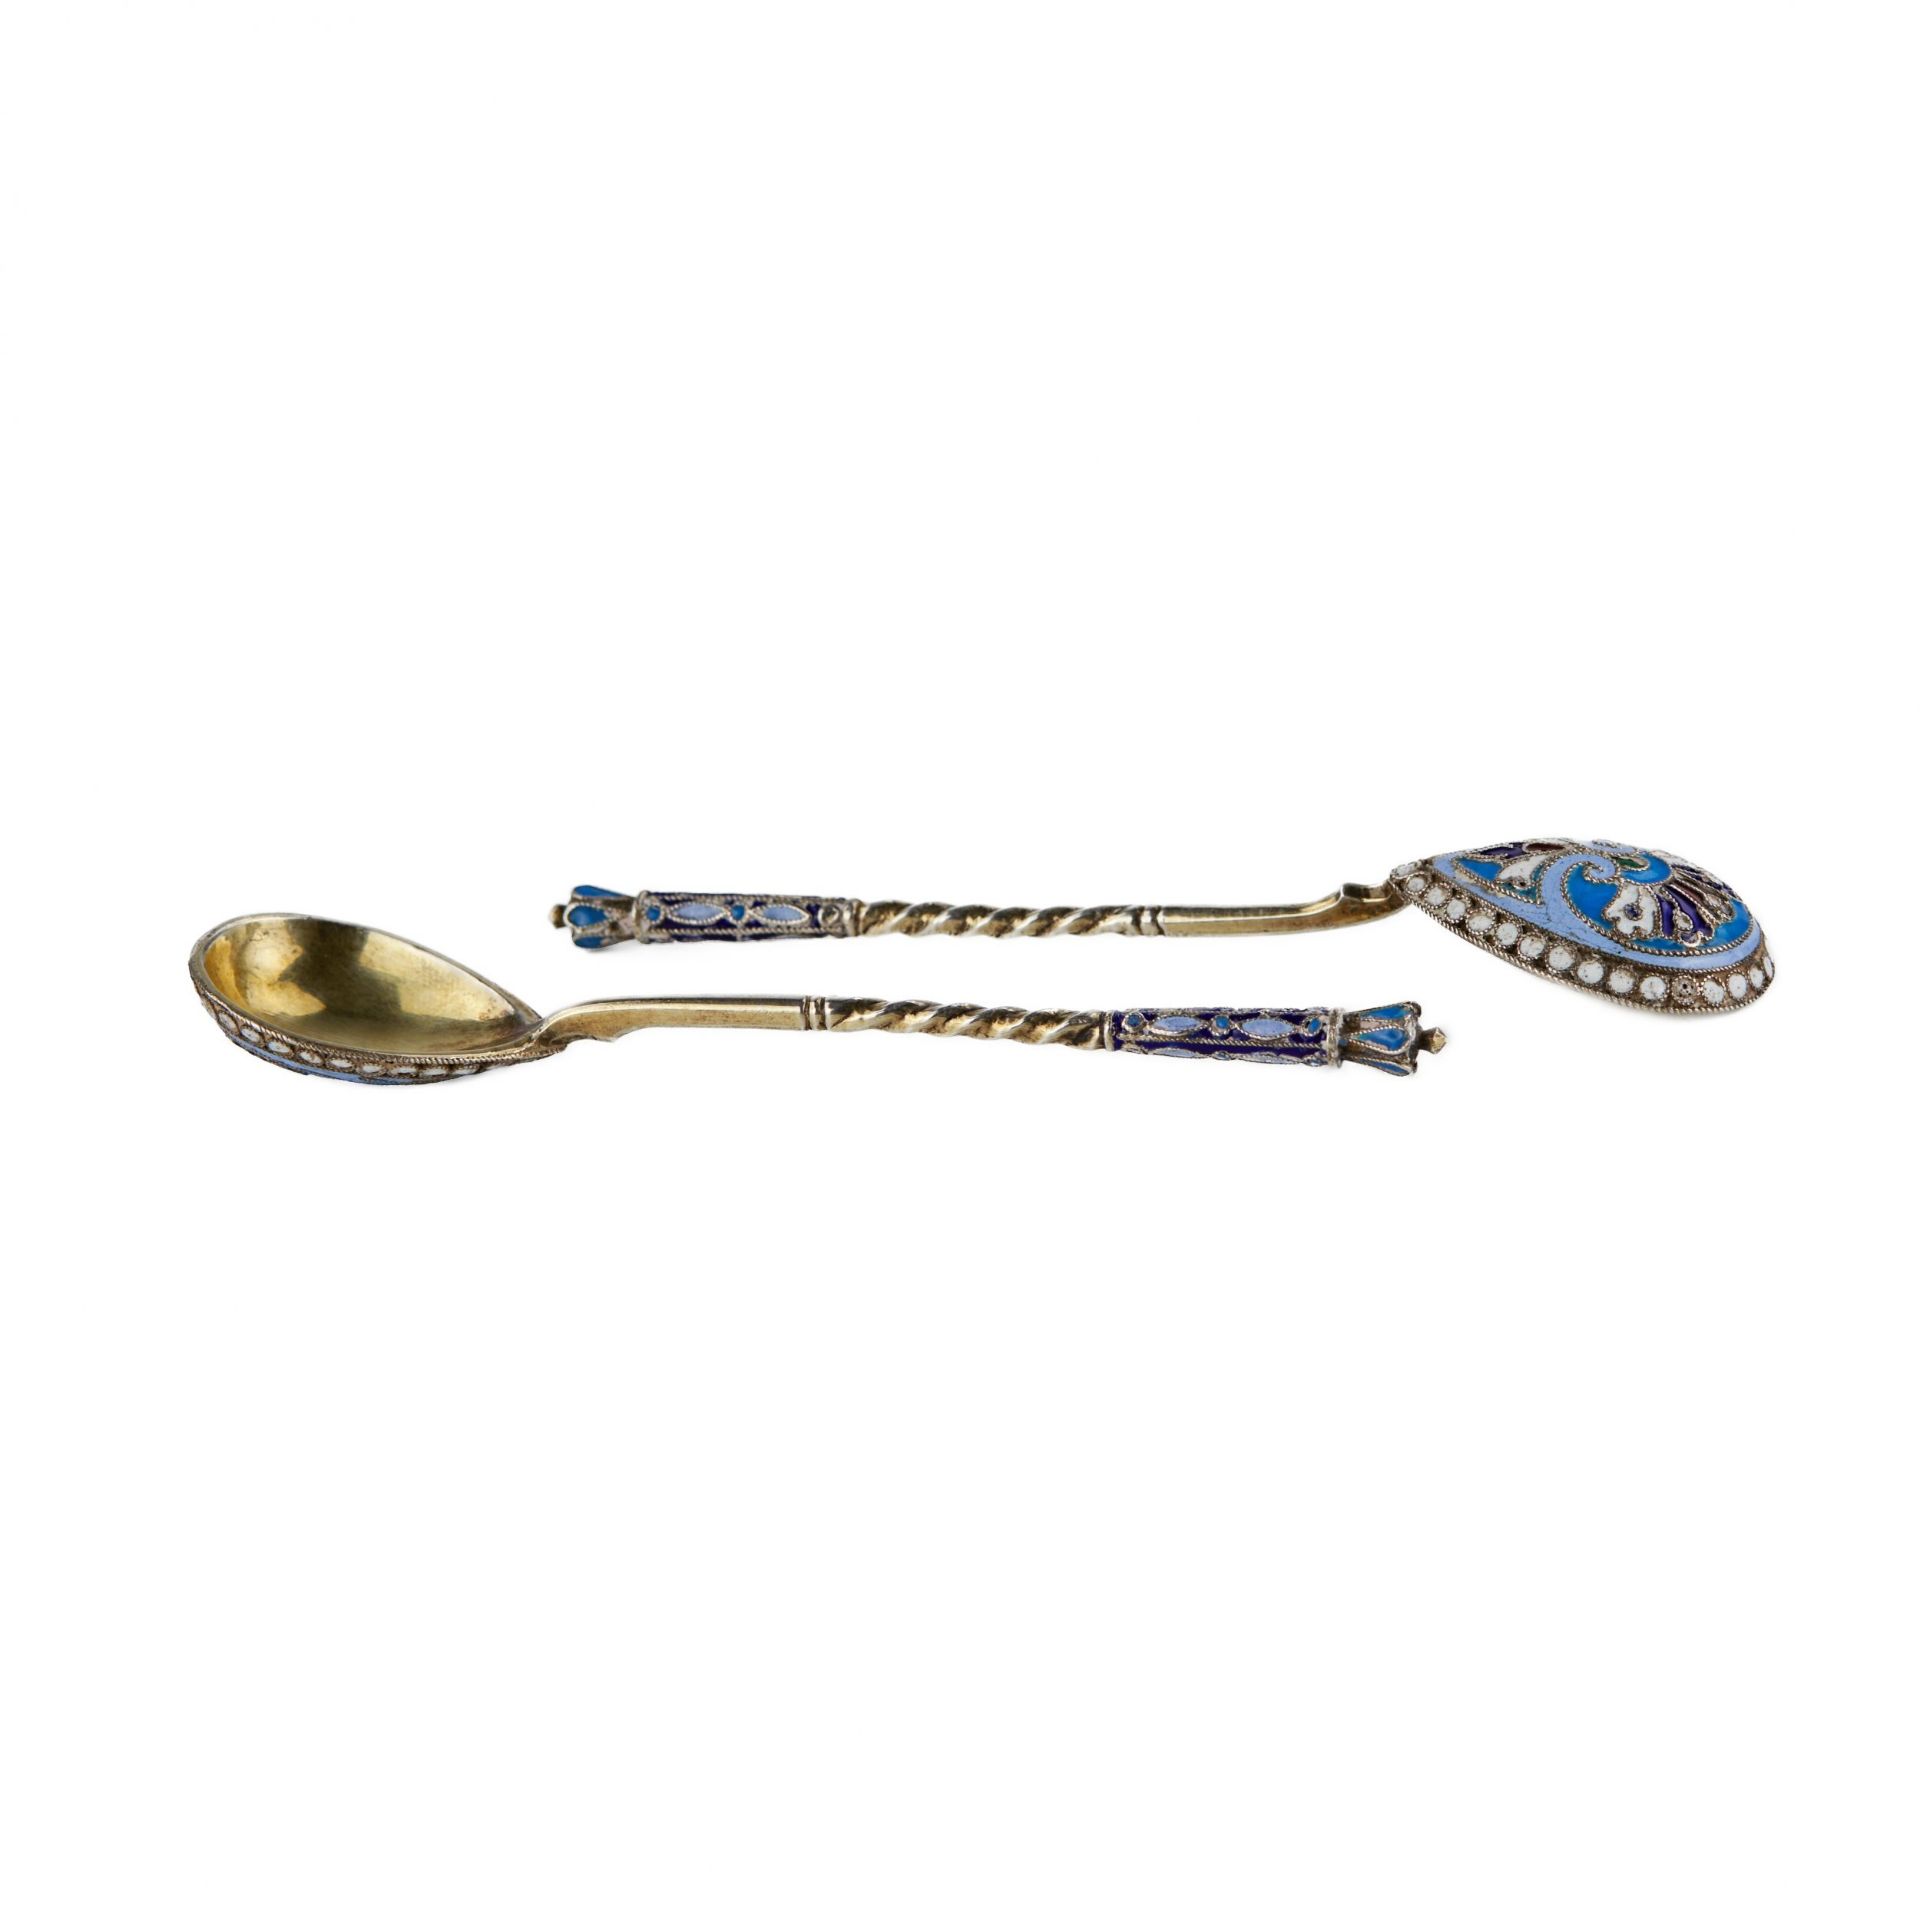 A pair of Russian silver spoons with enamel and gilding. The turn of the 19th-20th centuries. - Image 2 of 5